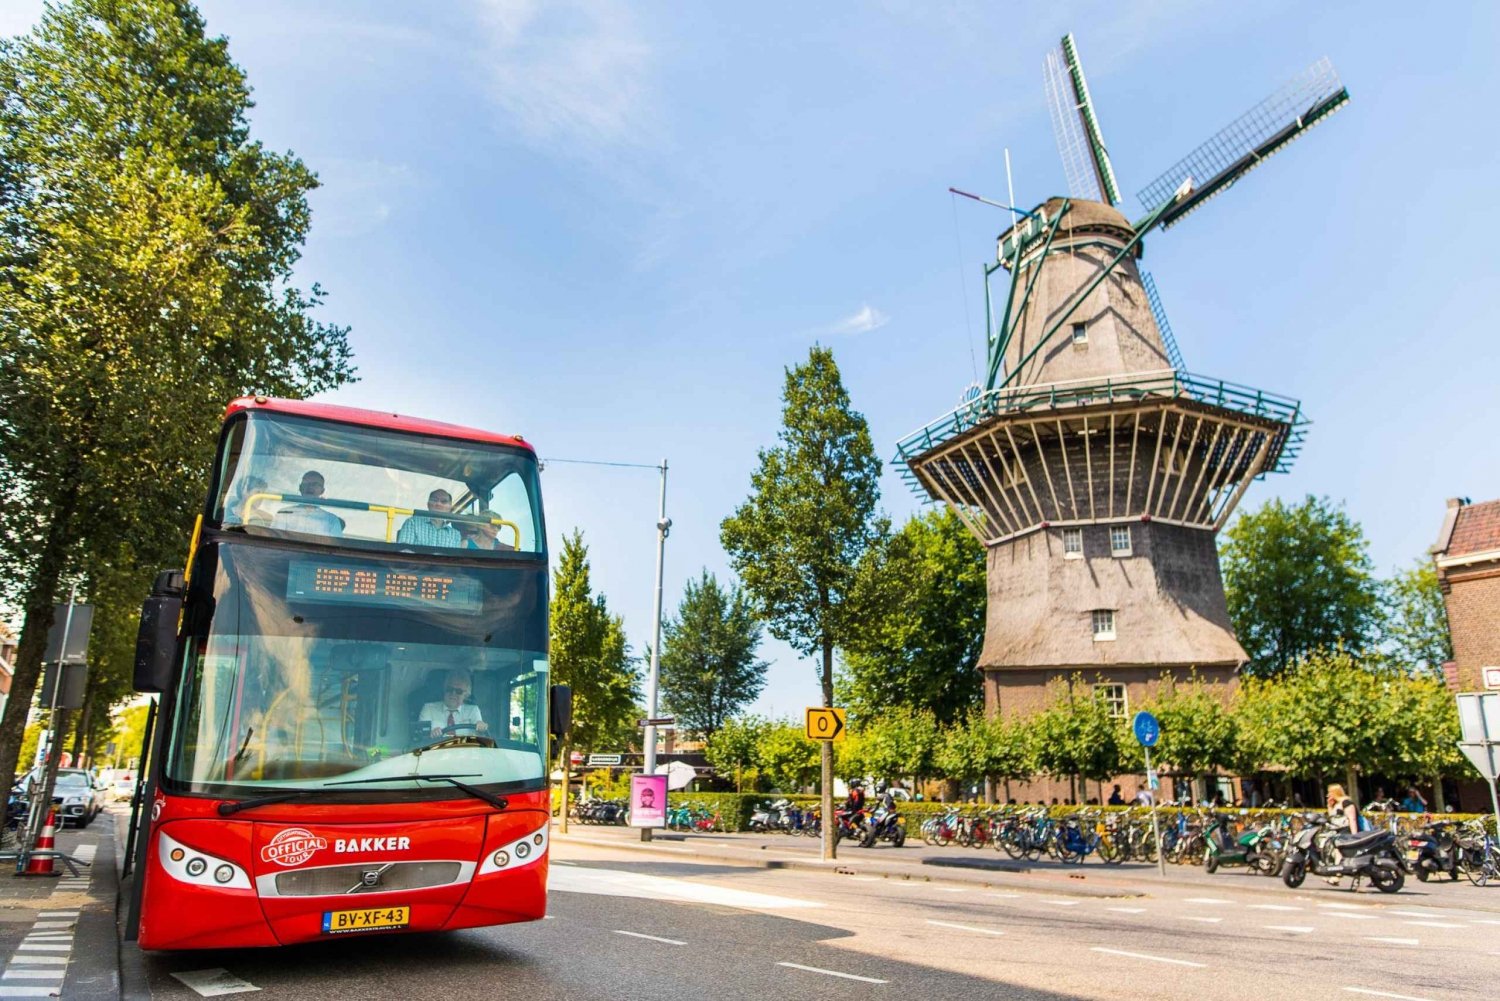 Amsterdam: Hop-On Hop-Off Bus Tour and Optional Canal Cruise